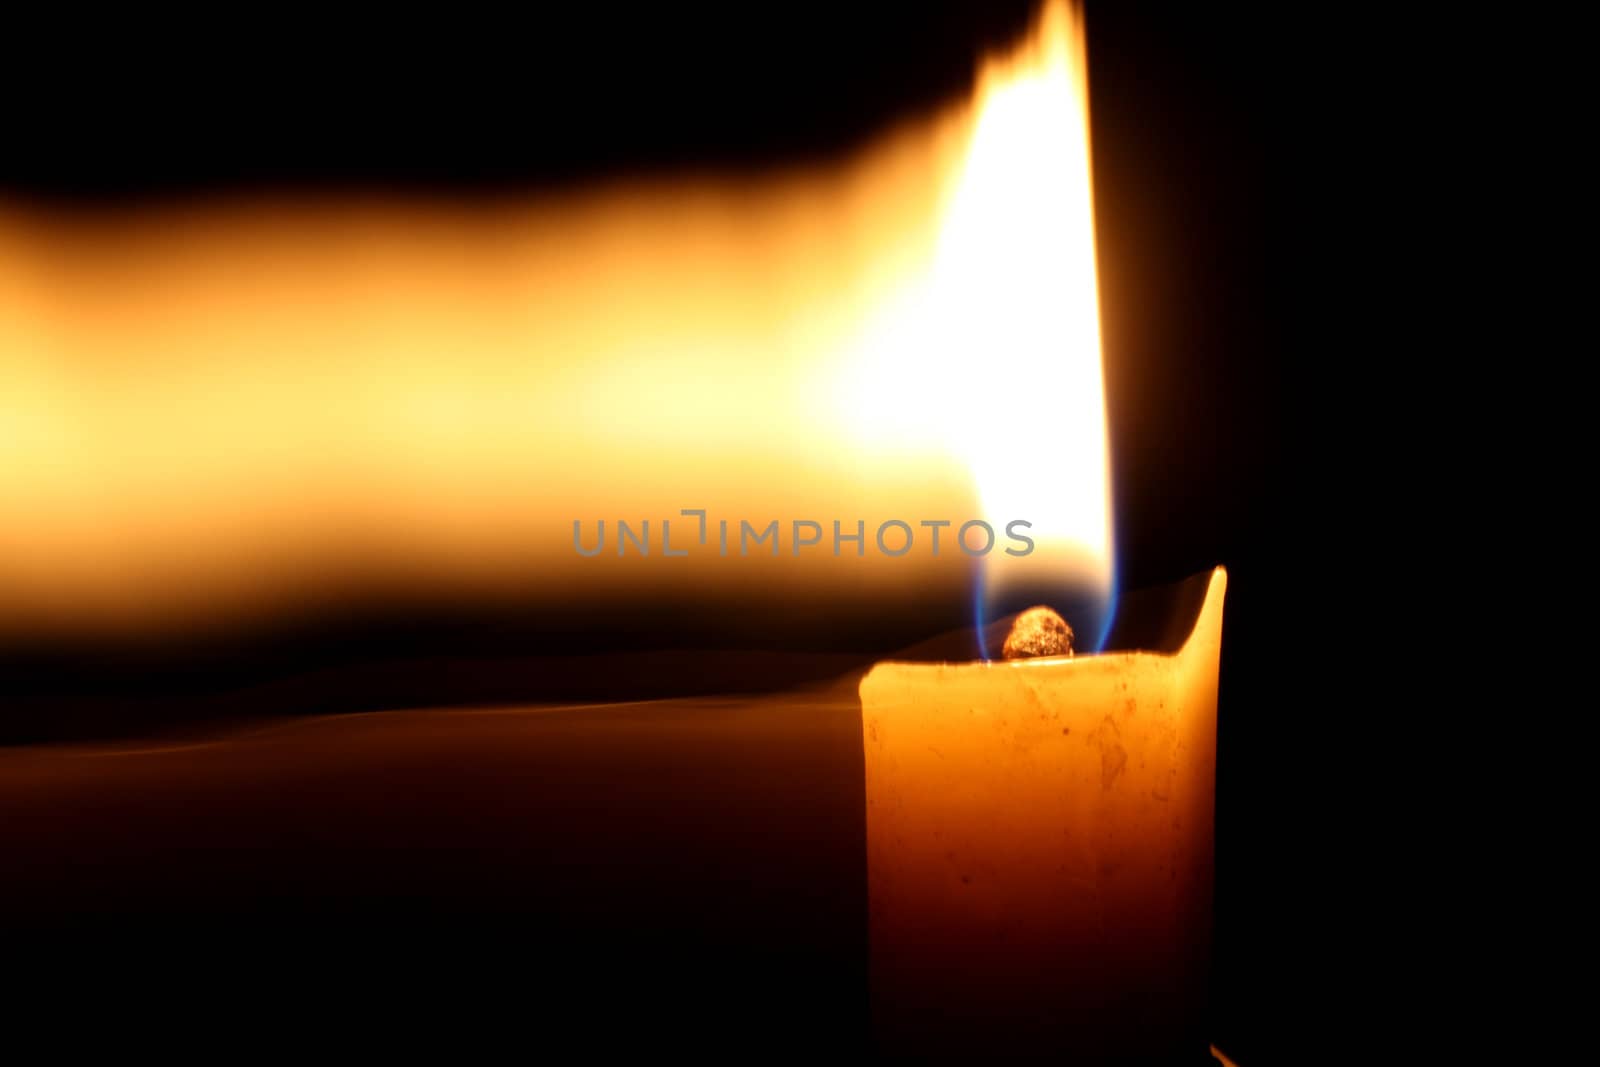 A metaphorical background showing a candle in motion, depicting a moment in time.